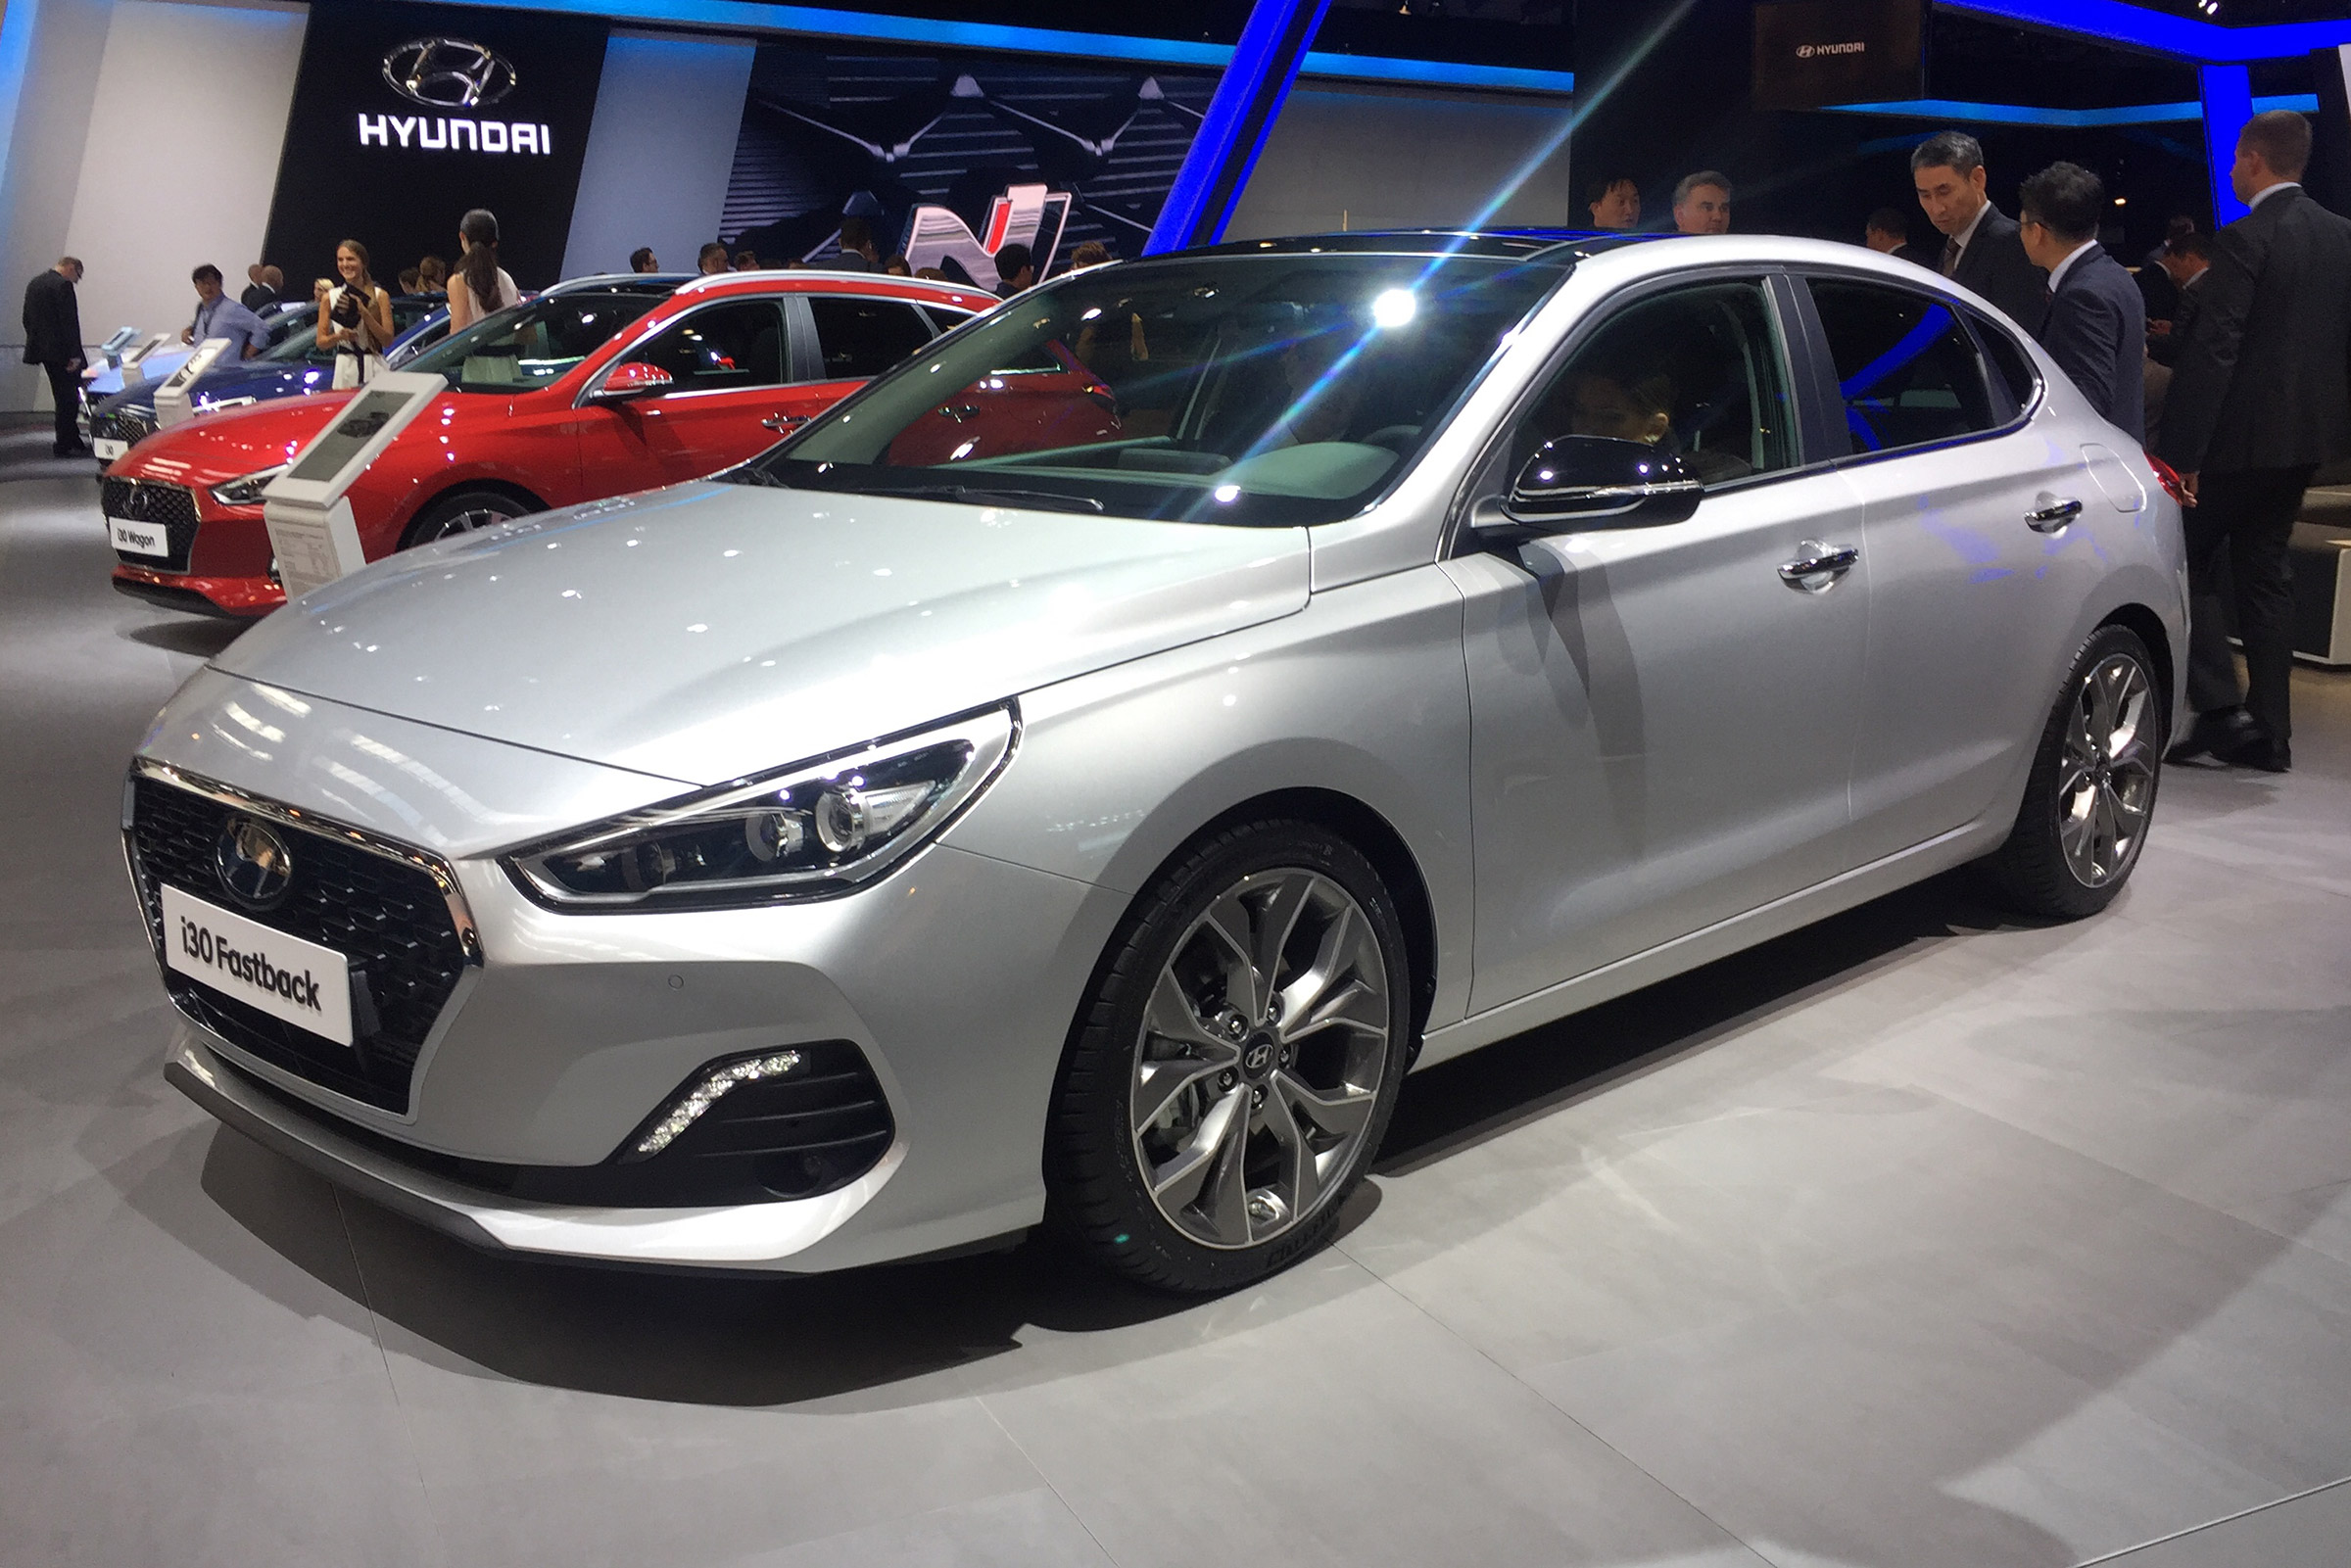 New Hyundai i30 Fastback brings 5door coupe option to